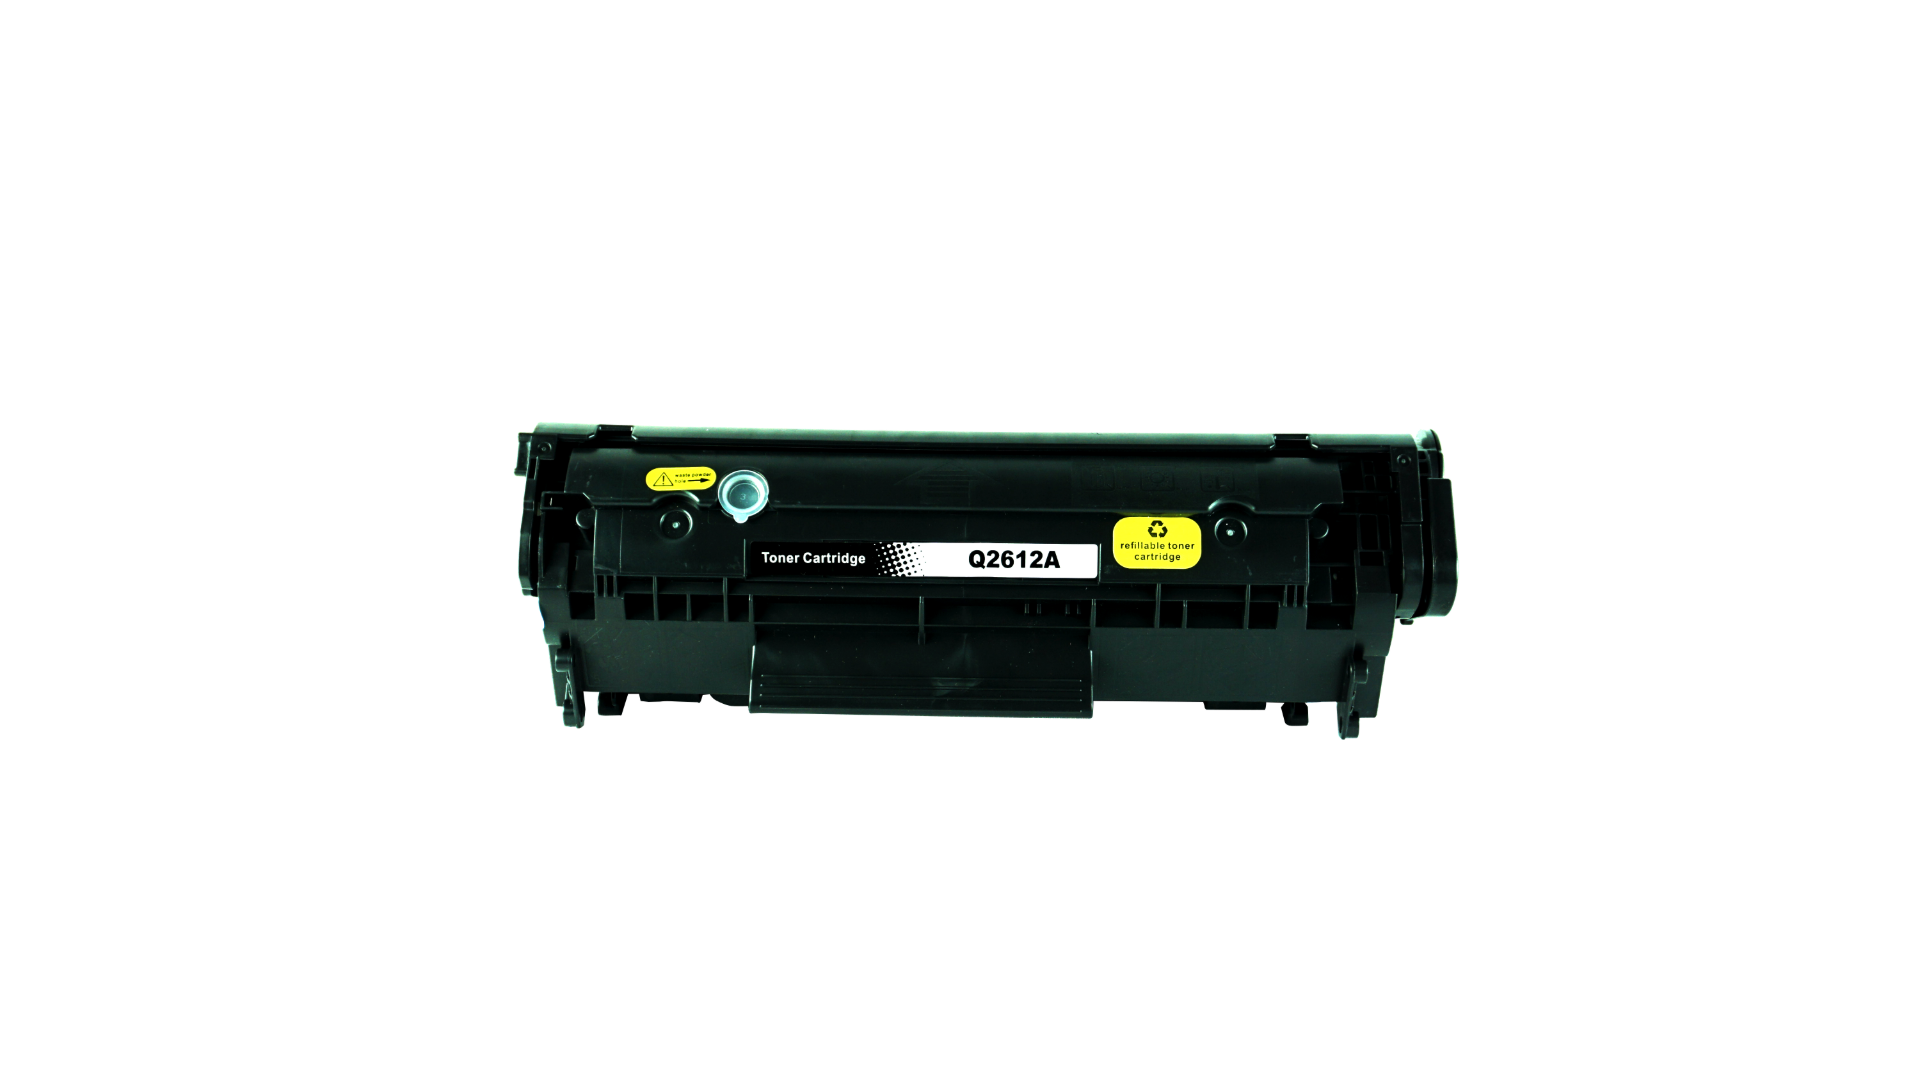 Compatible Q2612A 12A Laser Toner Cartridge For Use In HP Q2612 2612A 2612 HP LJ 1010 / 1012 / 1015 / 1018 / 1020 / 1022 / 3015 / 3020 / 3030 / 3050 / 3052 / 3055 / M1005 / M1005MFP / M1319 / M1319MFP